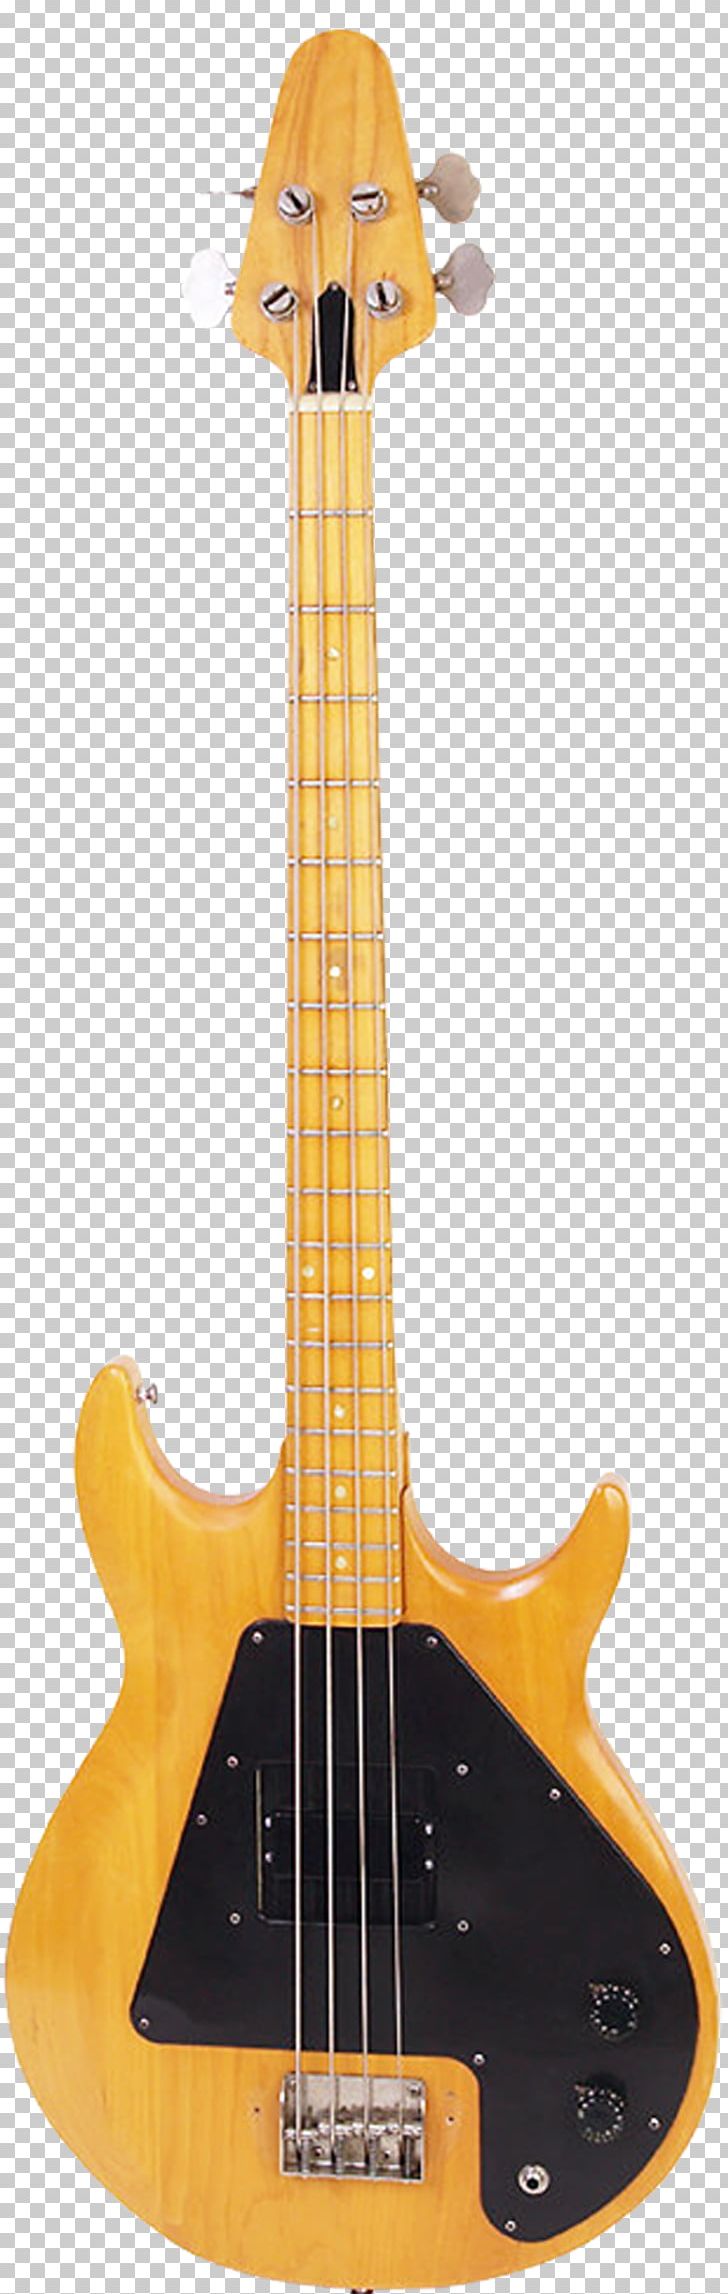 Musical Instruments Bass Guitar String Instruments Electric Guitar PNG, Clipart, Acoustic Electric Guitar, Cuatro, Guitar Accessory, Music, Musical Instrument Free PNG Download